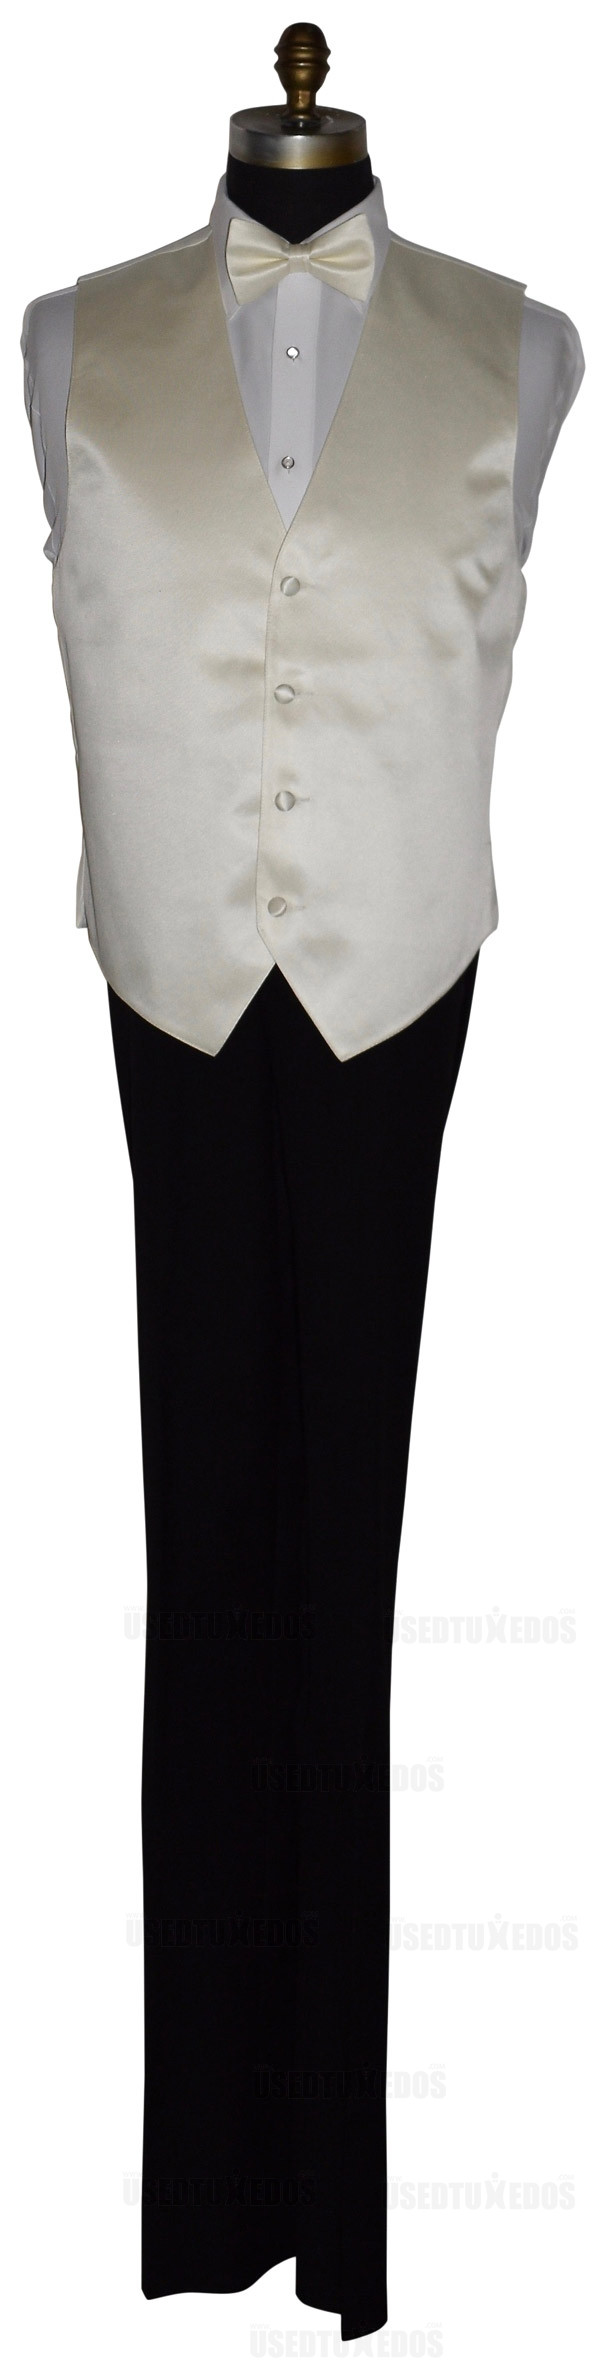 men's and boy's ivory pre-tied bowtie and off-white ivory 4 button vest by San Miguel Formals